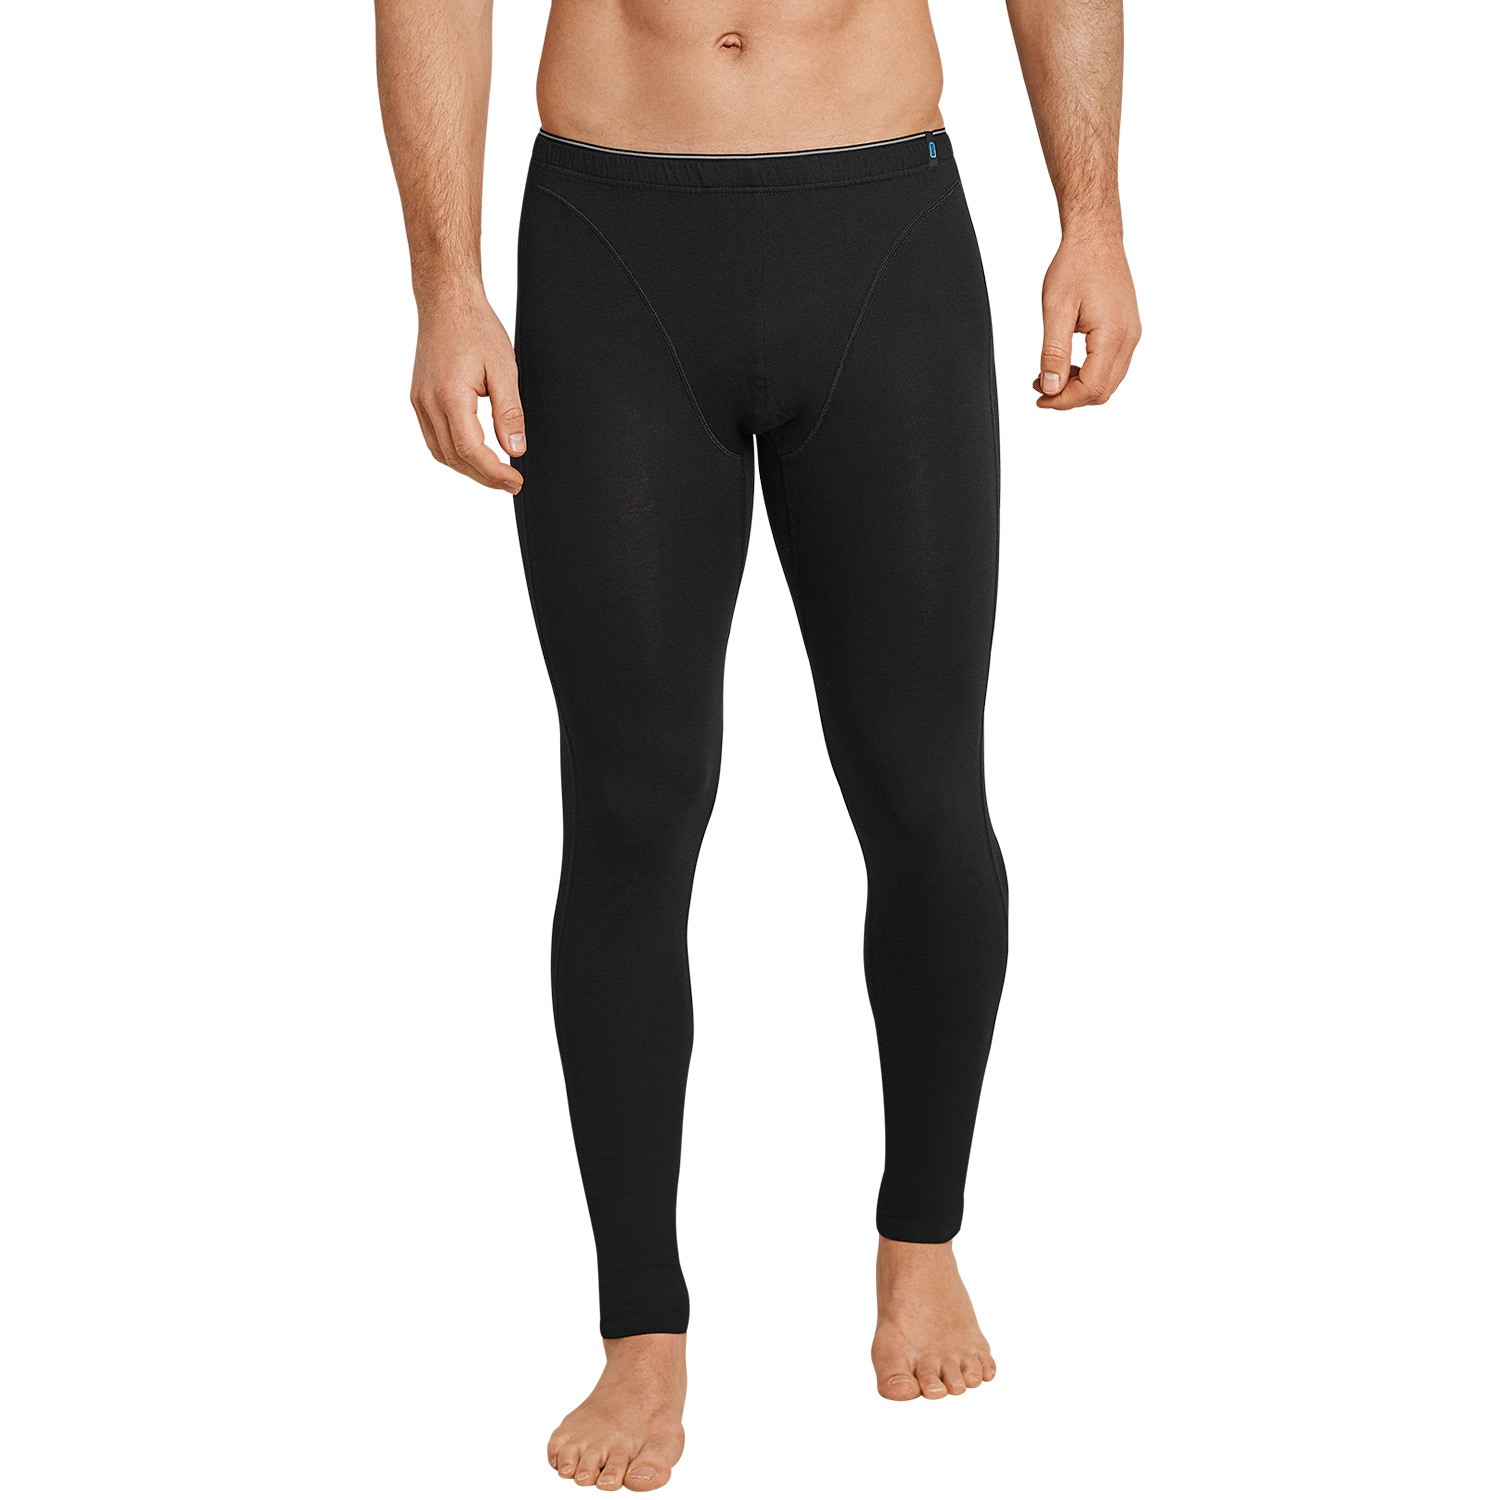 Schiesser 95-5 Underpants 3XL - Long Johns - Base layer - Clothing ...